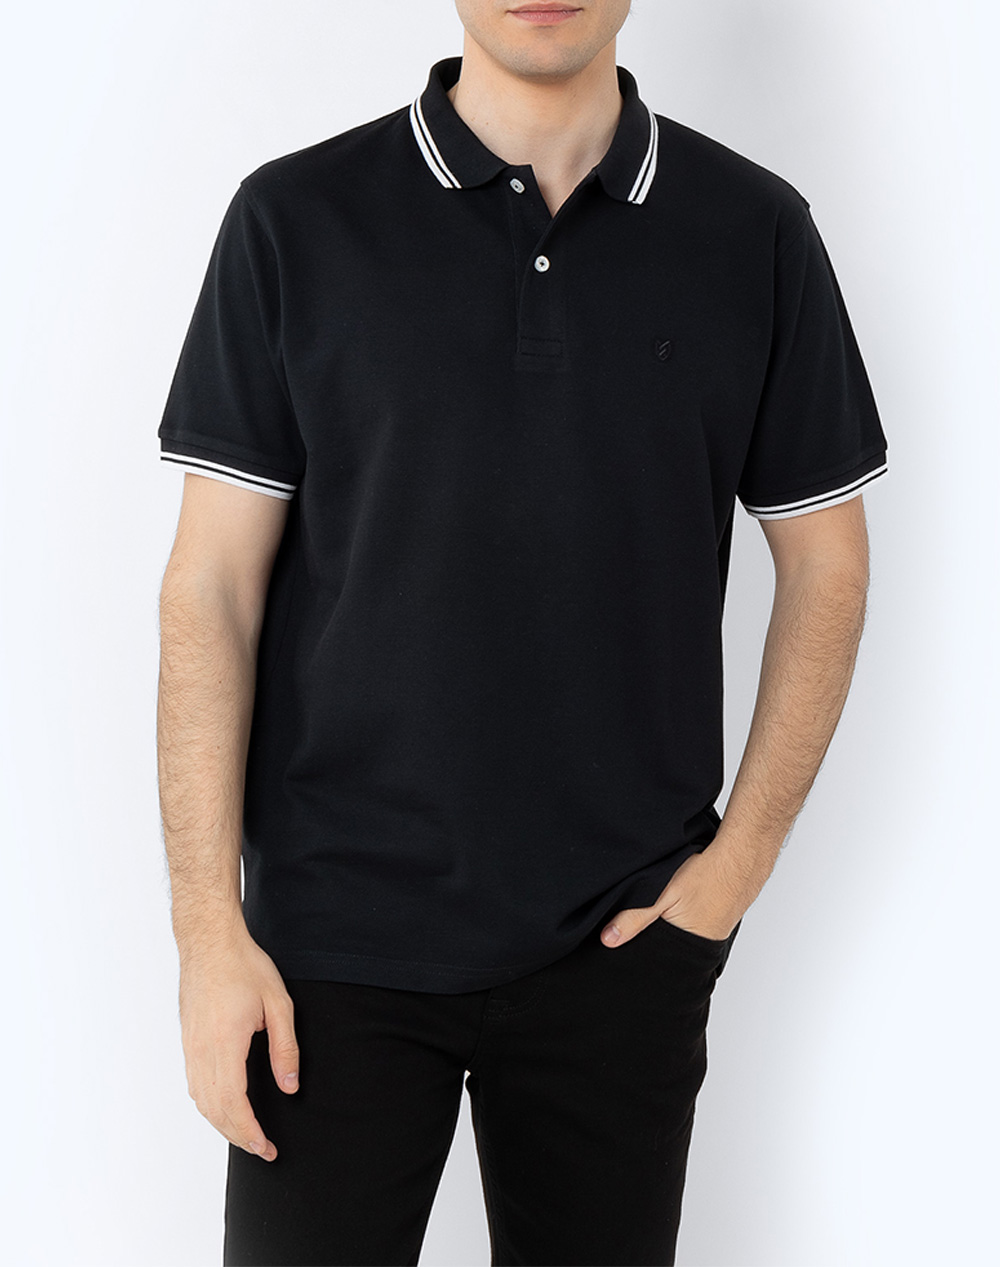 THE BOSTONIANS ΜΠΛΟΥΖΑ POLO PIQUE TWIN TIPPED REGULAR 3PS1271-BLACK Black